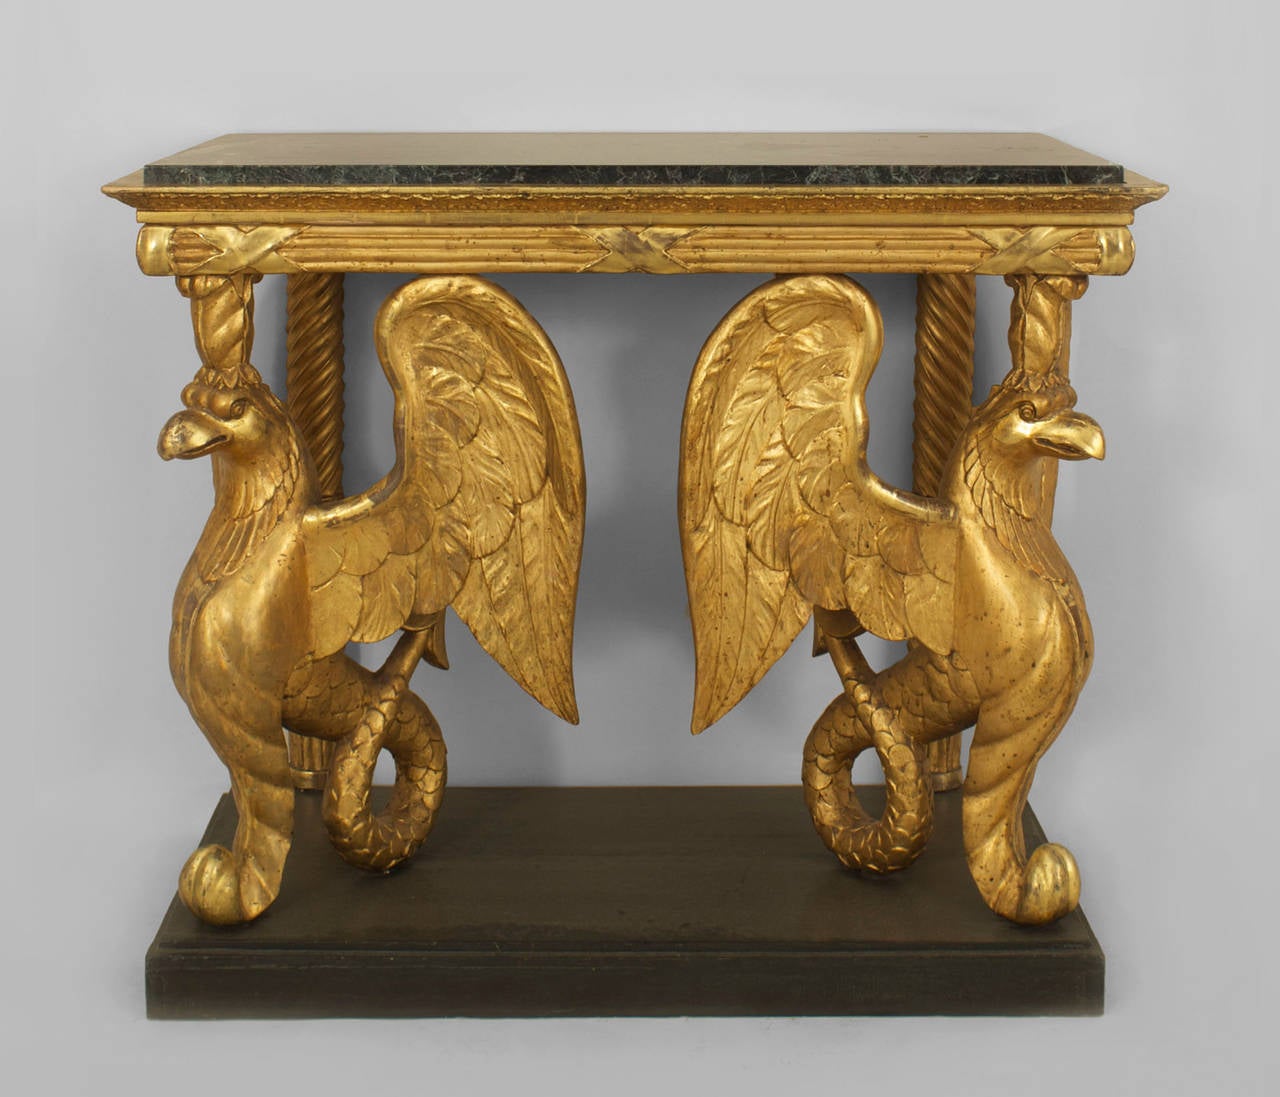 Early 19th century continental Swedish Empire gilt console having a pair of carved stylized
winged griffins with tails resting on an ebonized platform base with an inset marble top.